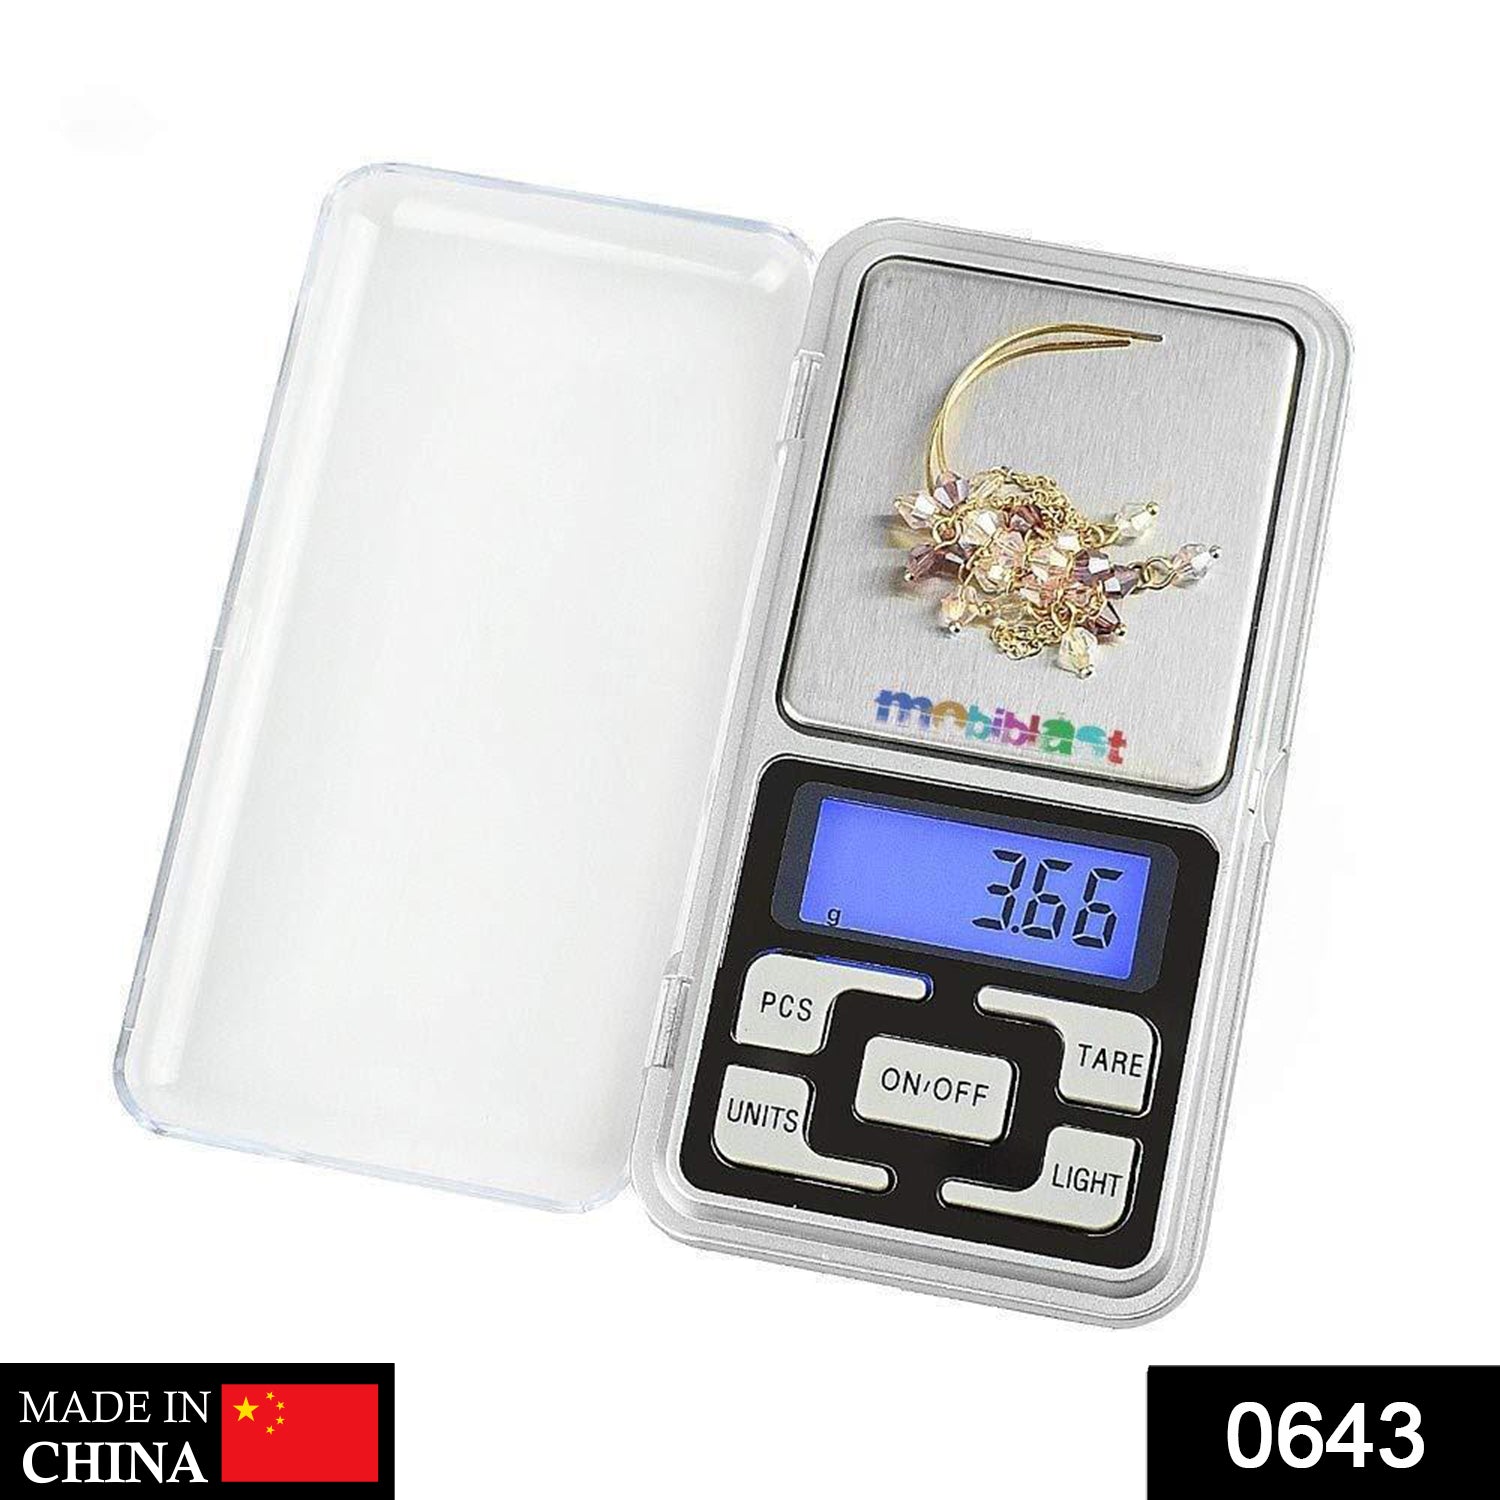 643 Multipurpose (MH-200) LCD Screen Digital Electronic Portable Mini Pocket Scale(Weighing Scale), 200g DeoDap